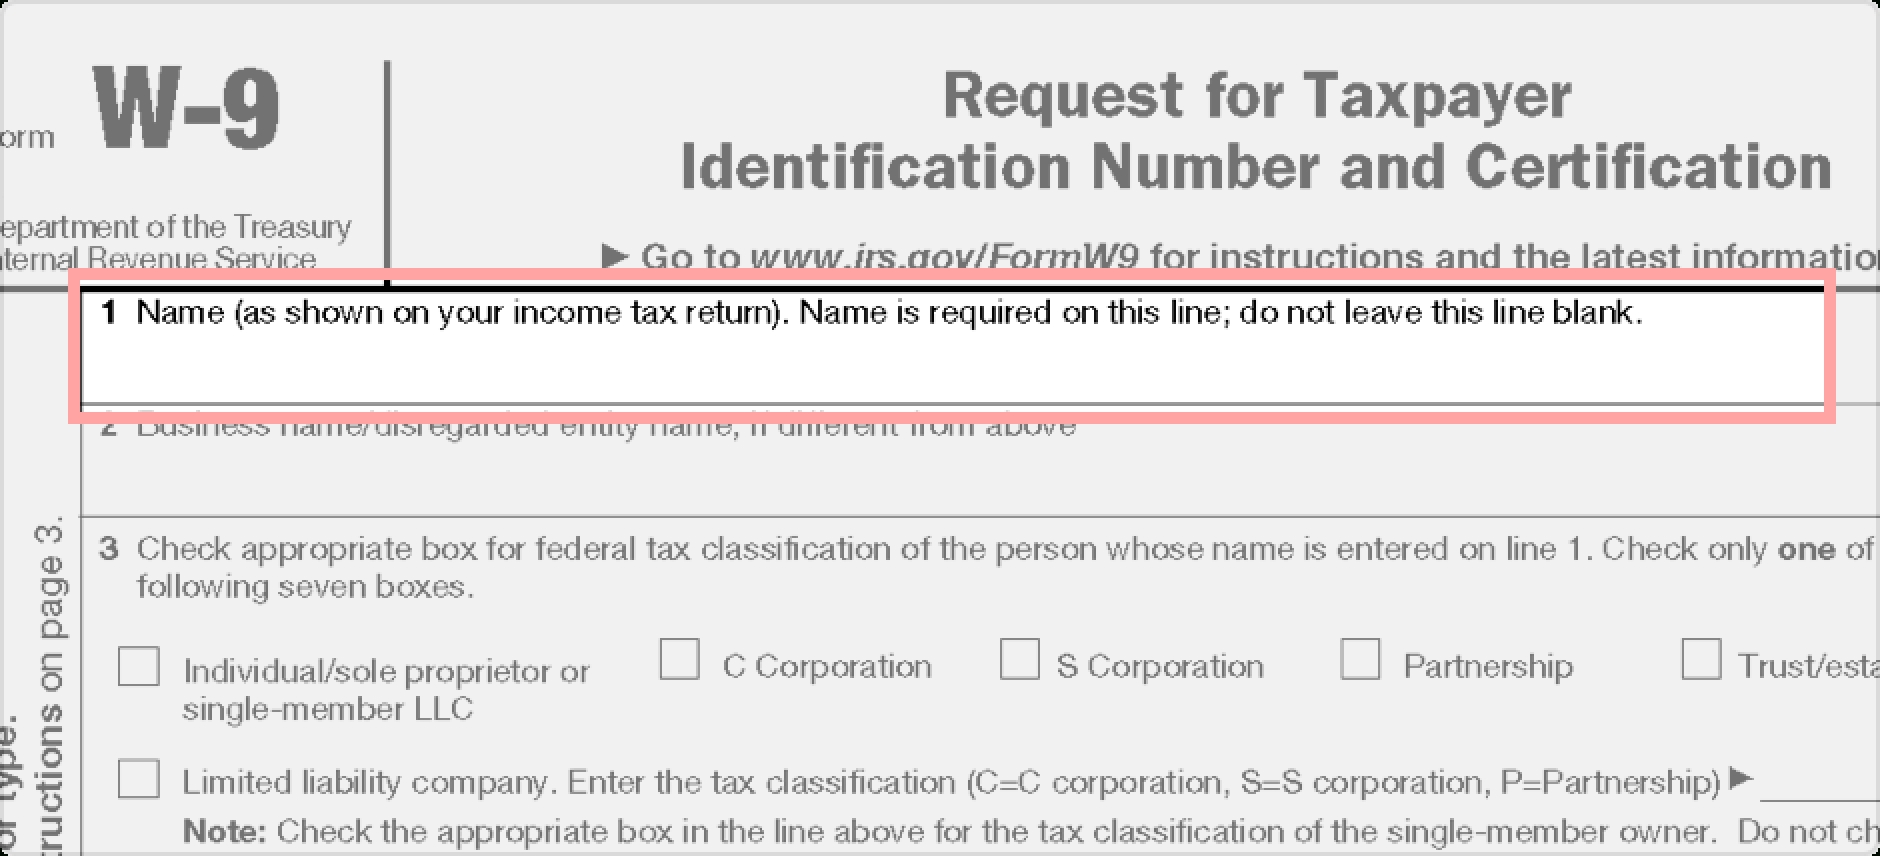 W-9 Form: Fillable, Printable, Download Free. 2020 Instructions-2021 W-9 Form Printable Free Irs